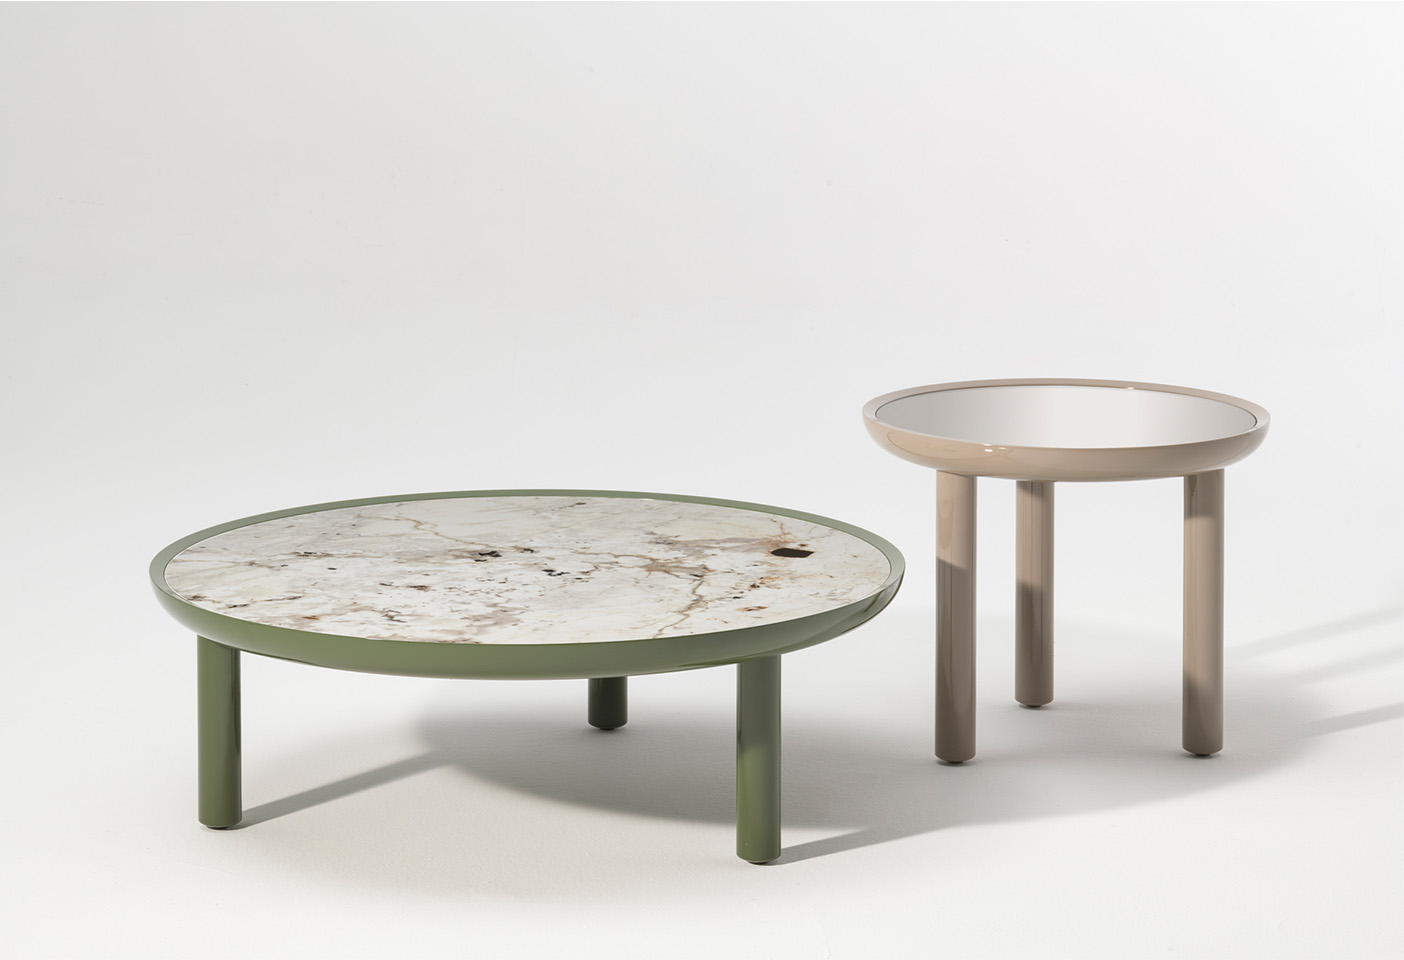 Rodolfo Dordini's K-Top tables for Kartell, with high-gloss lacquered legs and tops with a variety of finishes, including a refined ceramic version: mirrored, dove grey, green, black and marble effect. Photo c/o Kartell.